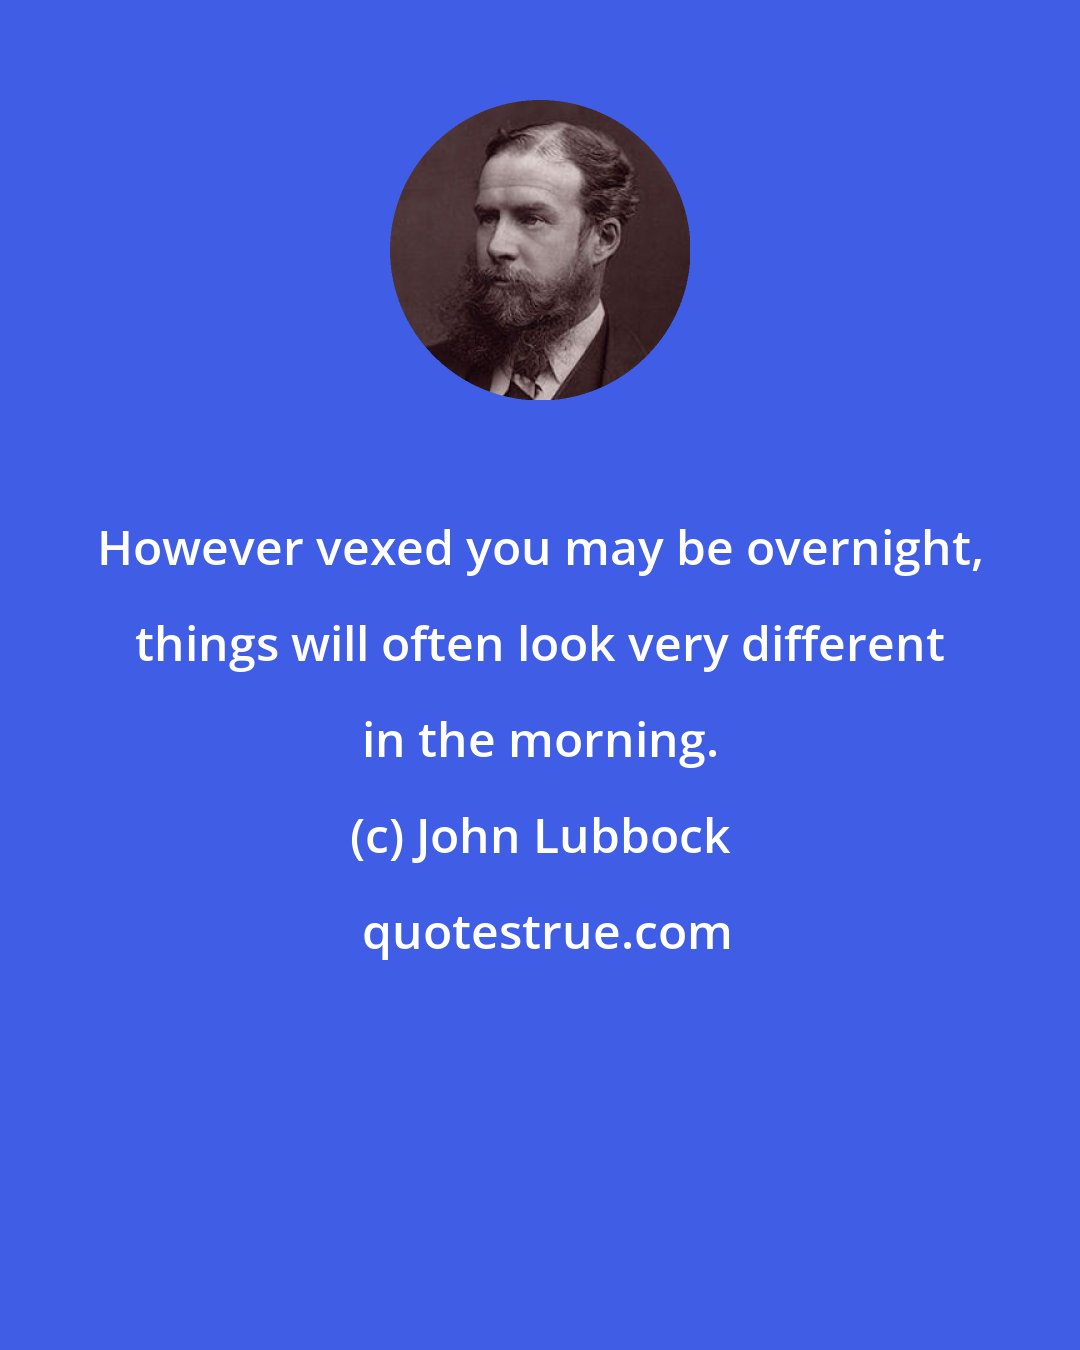 John Lubbock: However vexed you may be overnight, things will often look very different in the morning.